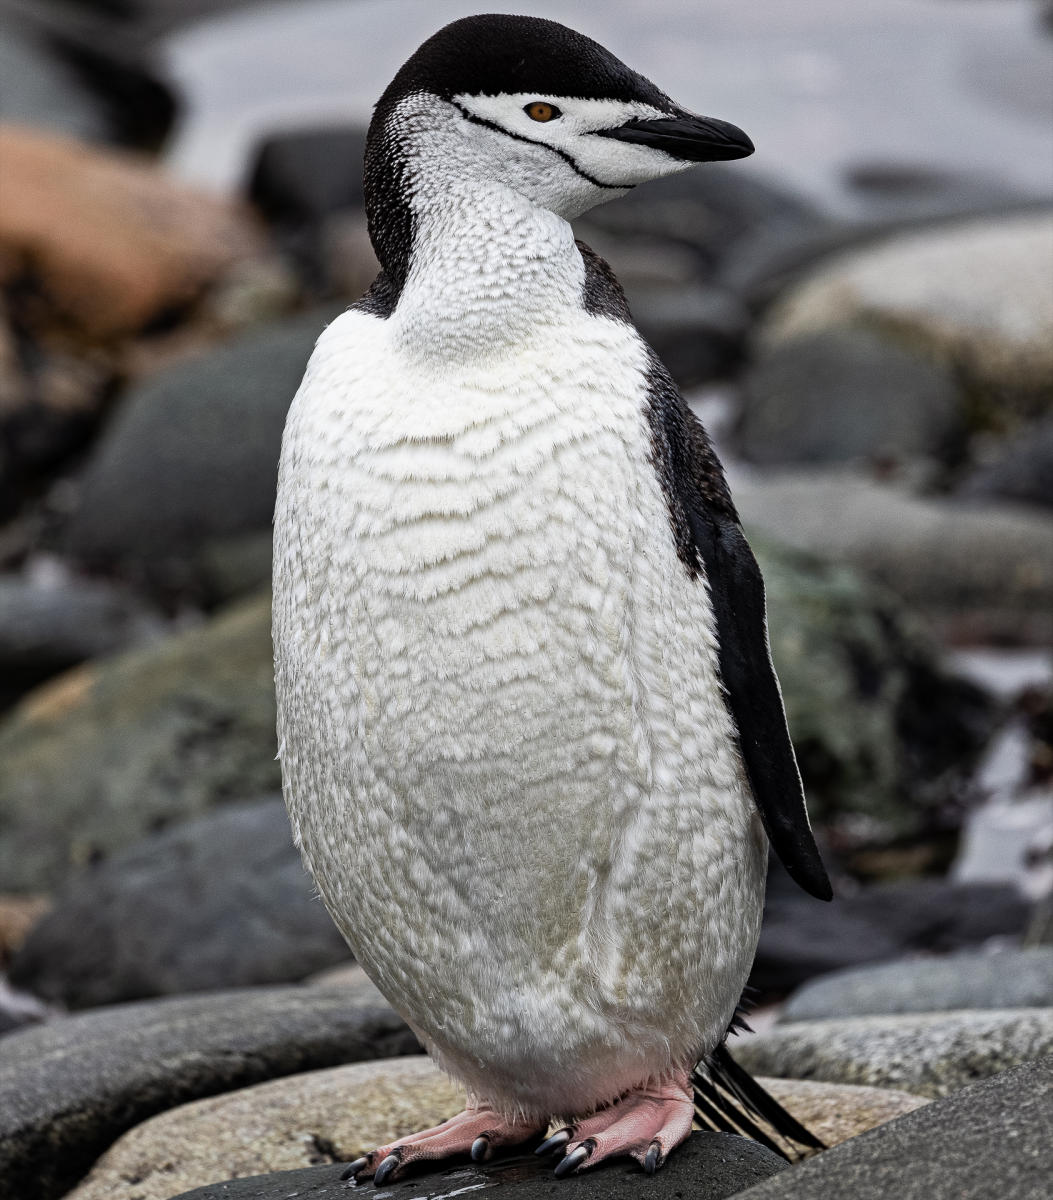 Chinstrap penguin after a cleansing swim,
Ketly Bay